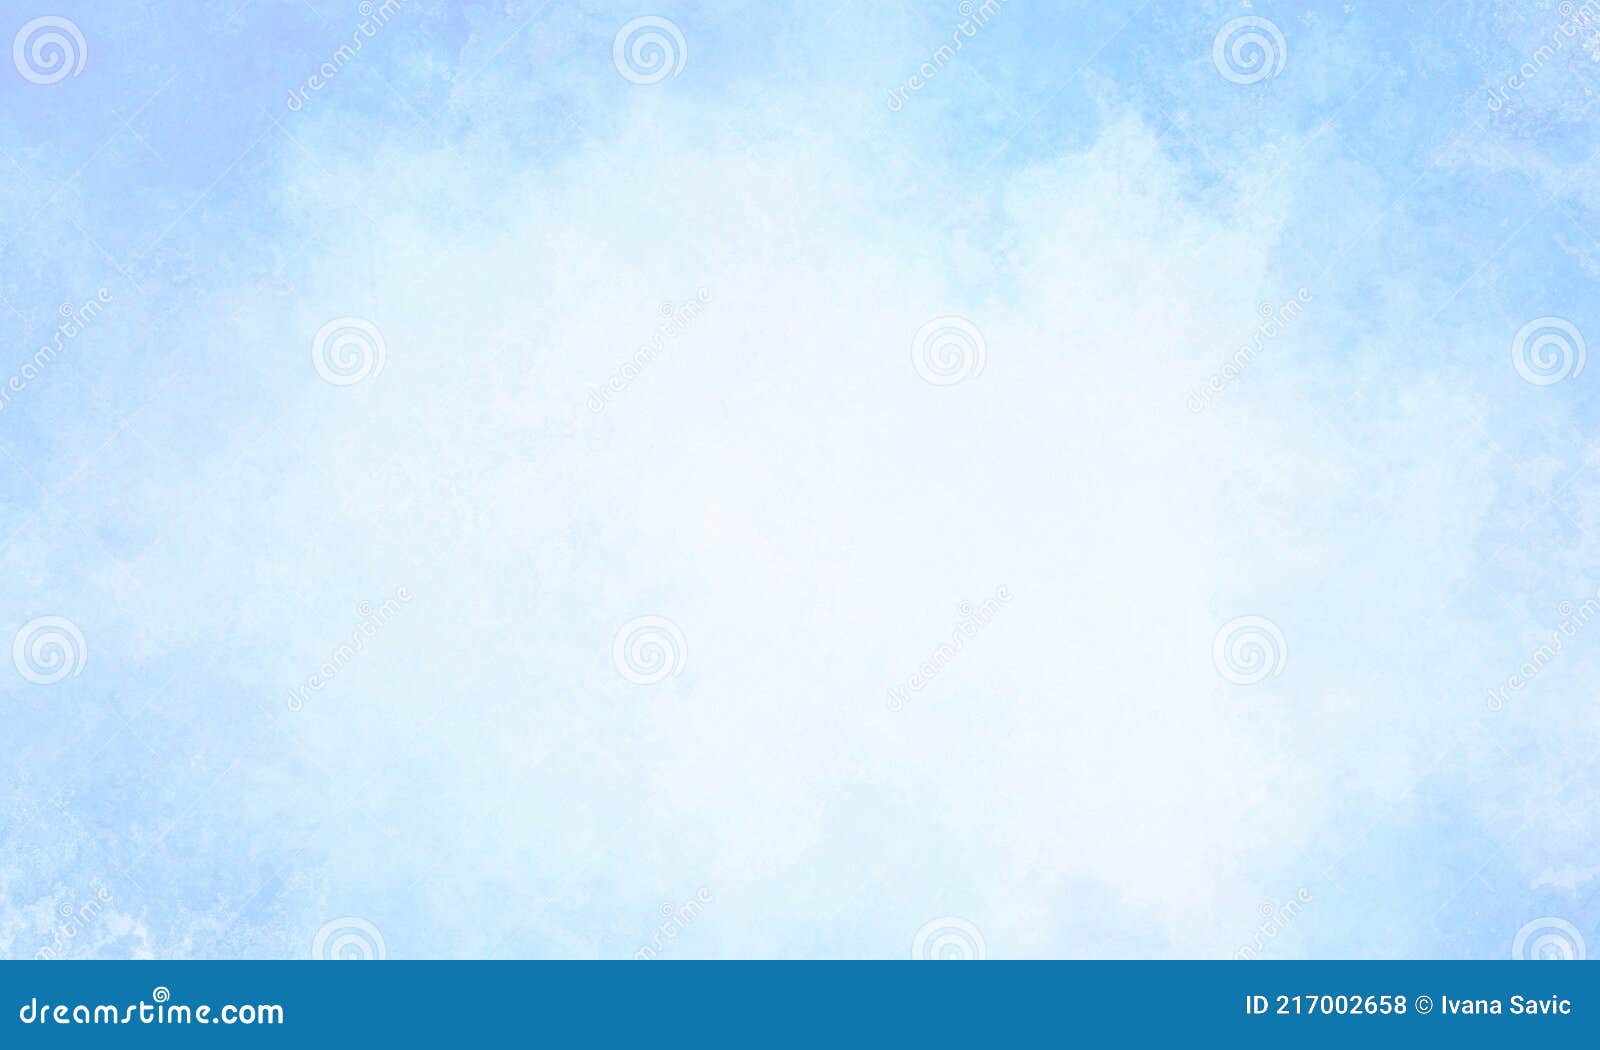 light soft blue sky background, abstract realistic spring blue paper